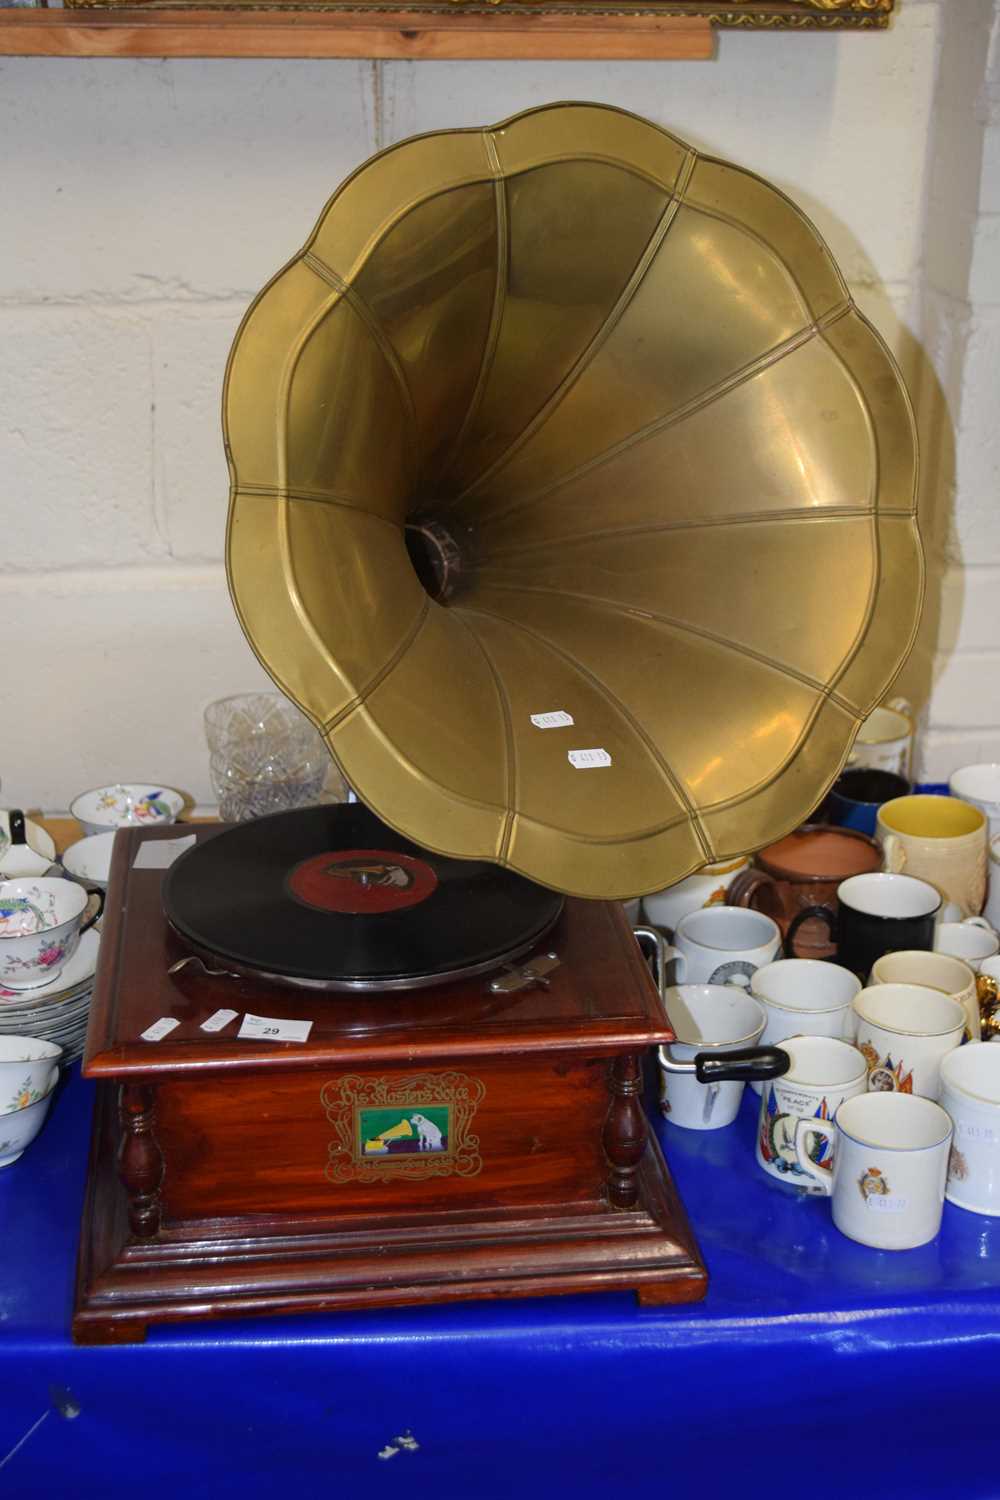 An old style gramophone player with metal horn